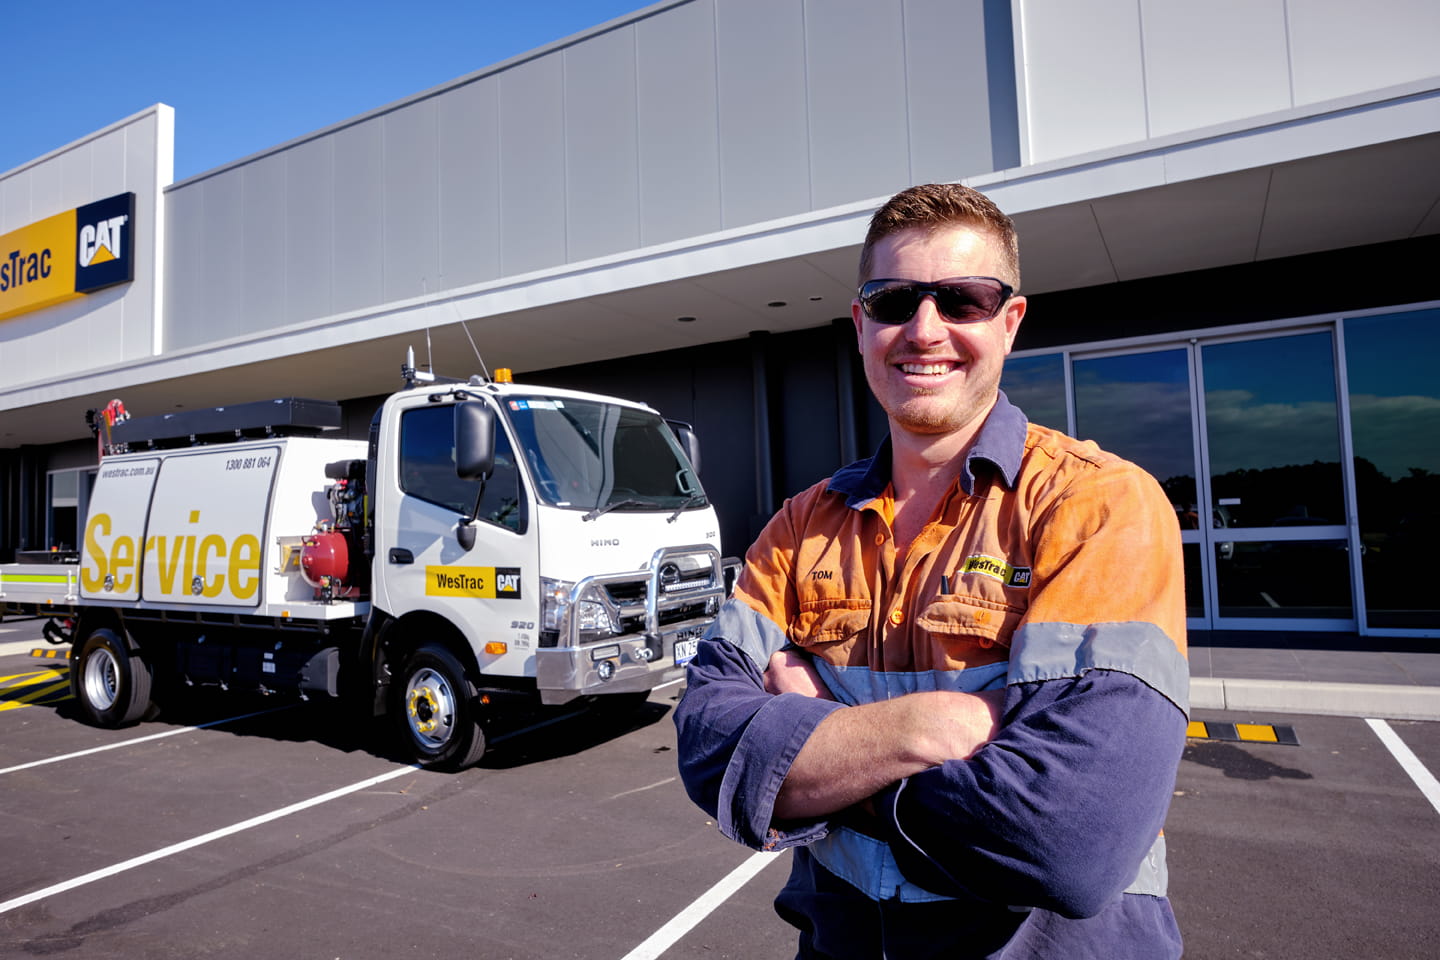 Field service technician in front of service truck and Marsden Park branch